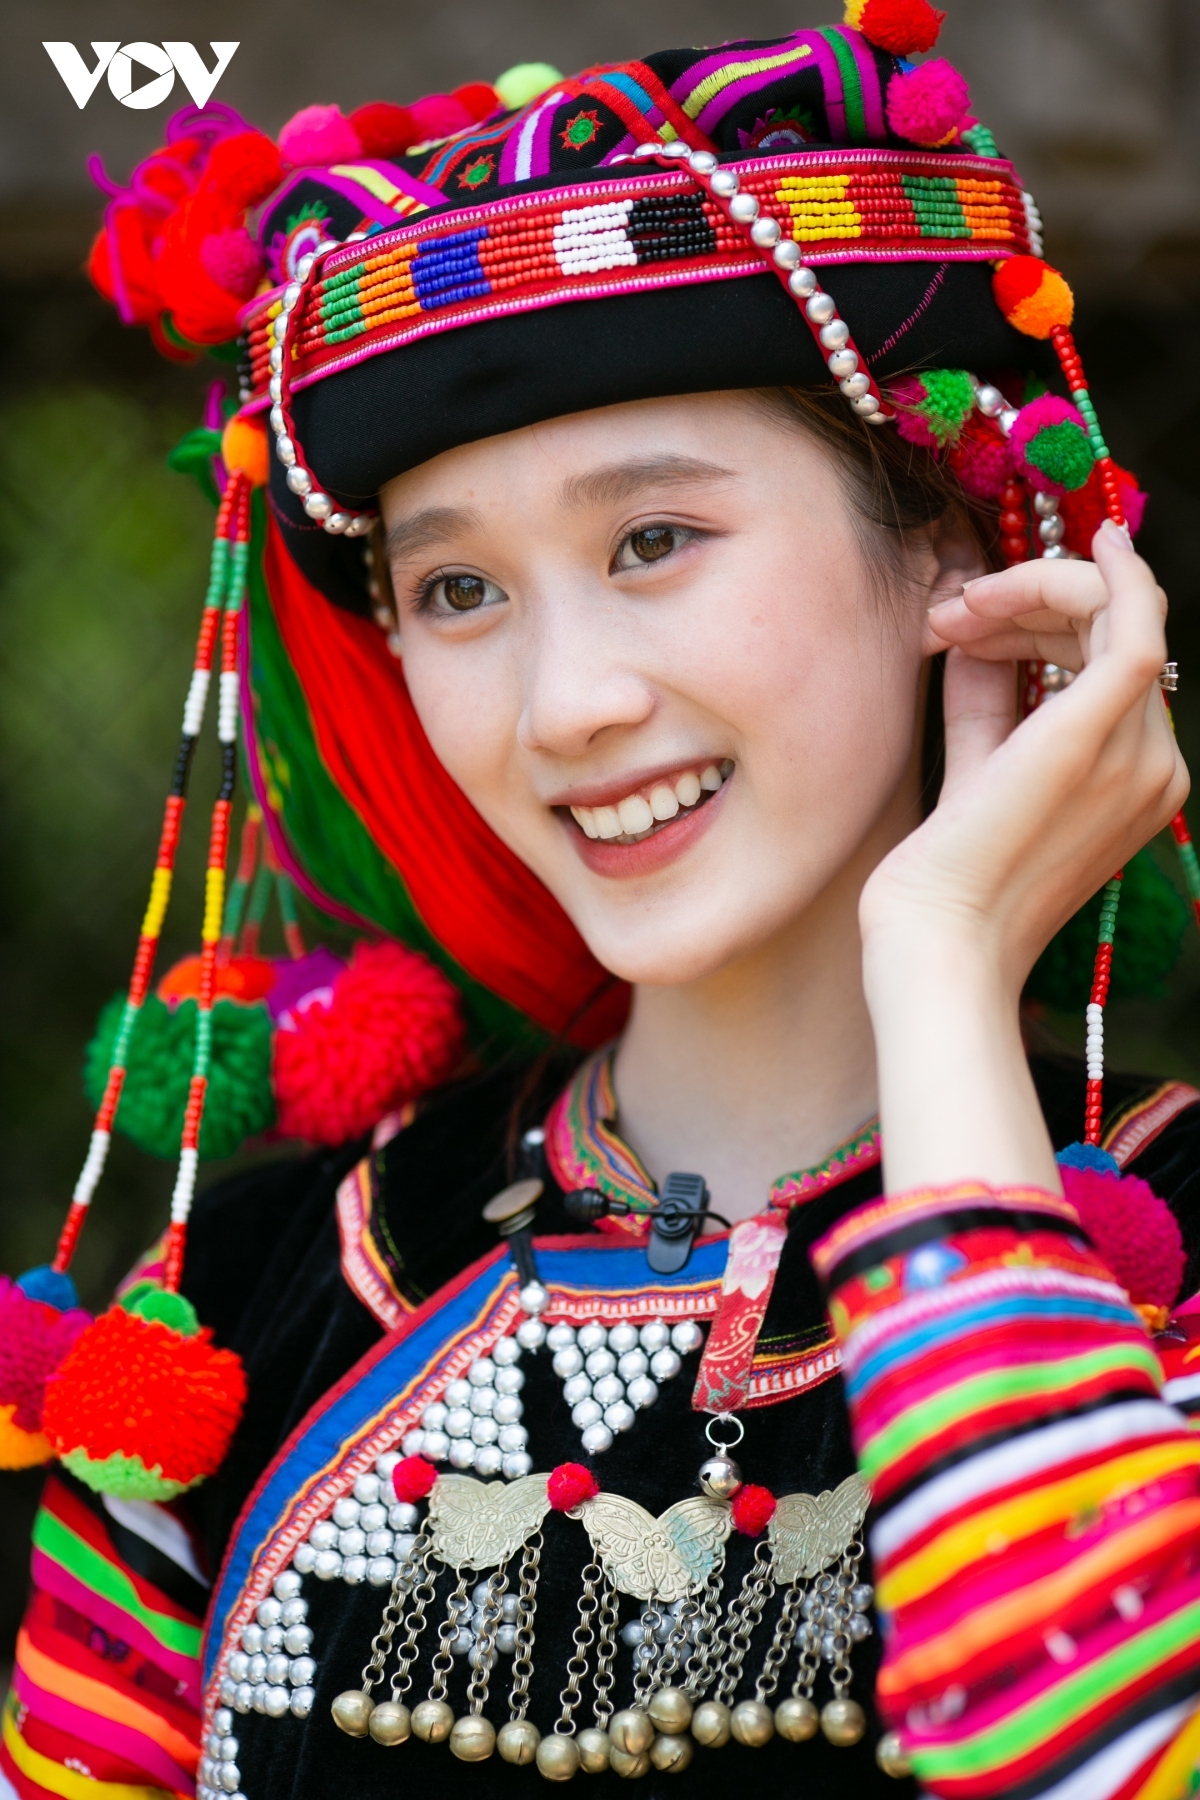 The costume of Ha Nhi Hoa women is relatively intricate, consisting of a hat, a blouse, a waistband, and a brassiere.